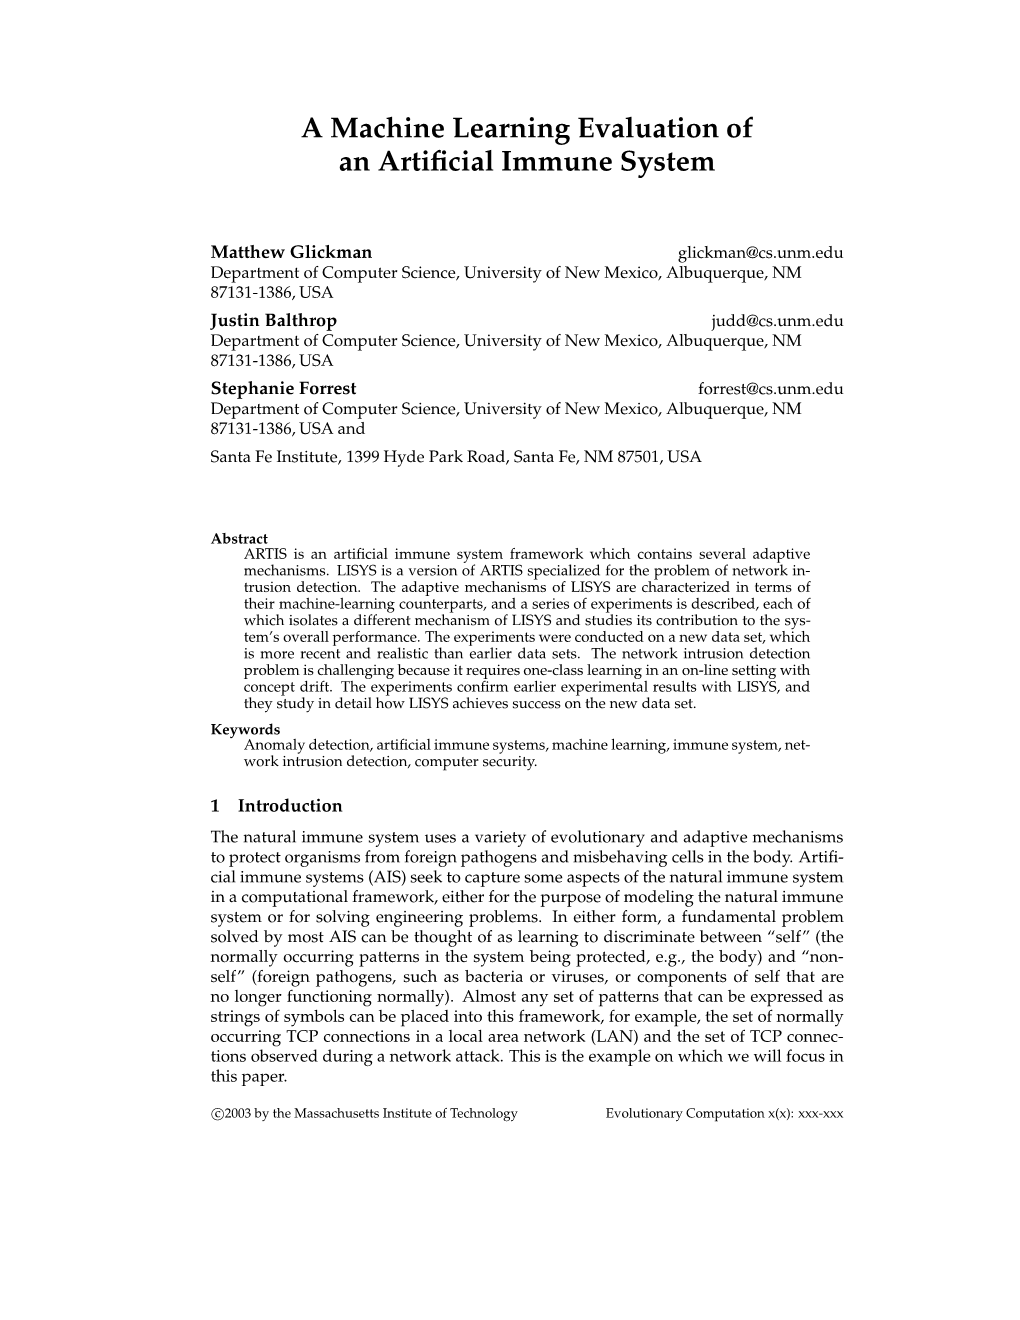 A Machine Learning Evaluation of an Artificial Immune System